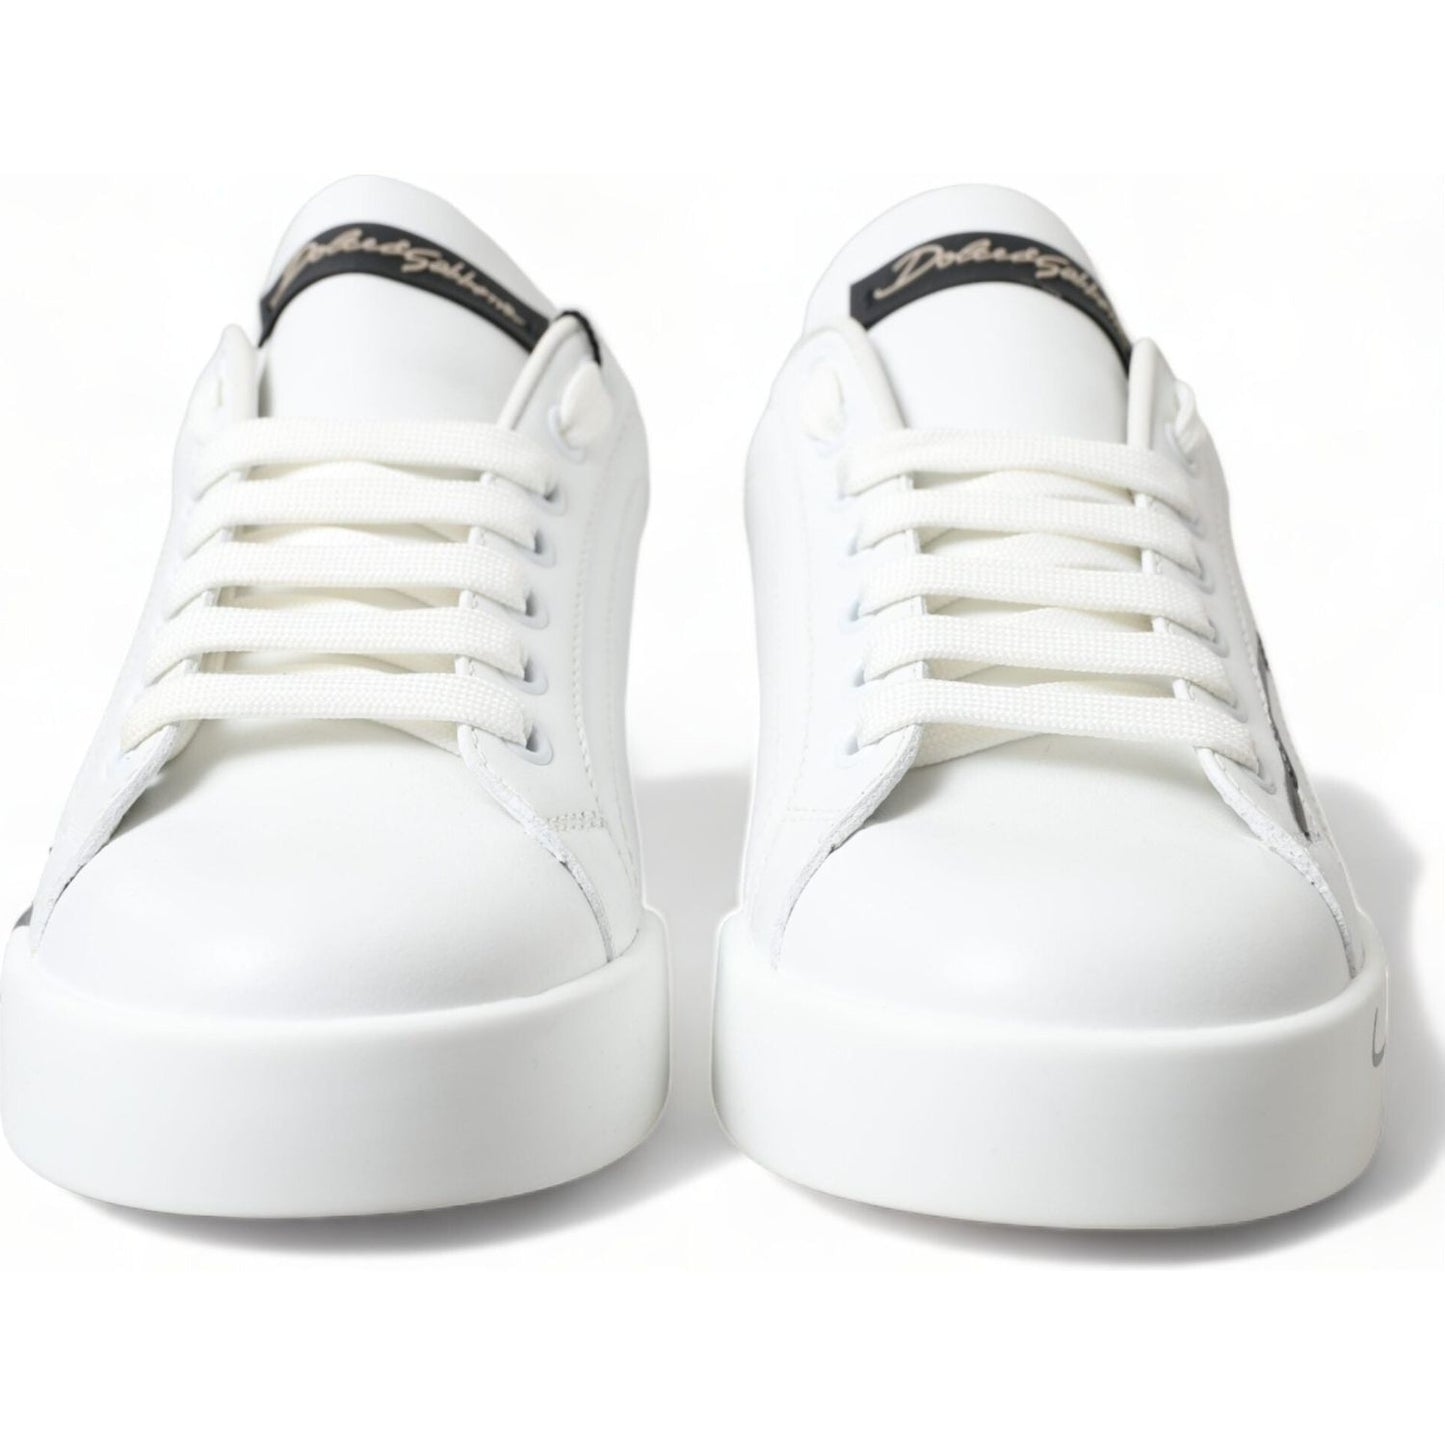 Dolce & Gabbana Elegant White & Gold Leather Sneakers white-gold-lace-up-womens-low-top-sneakers 465A2615-BG-scaled-3b46ee78-1c7.jpg